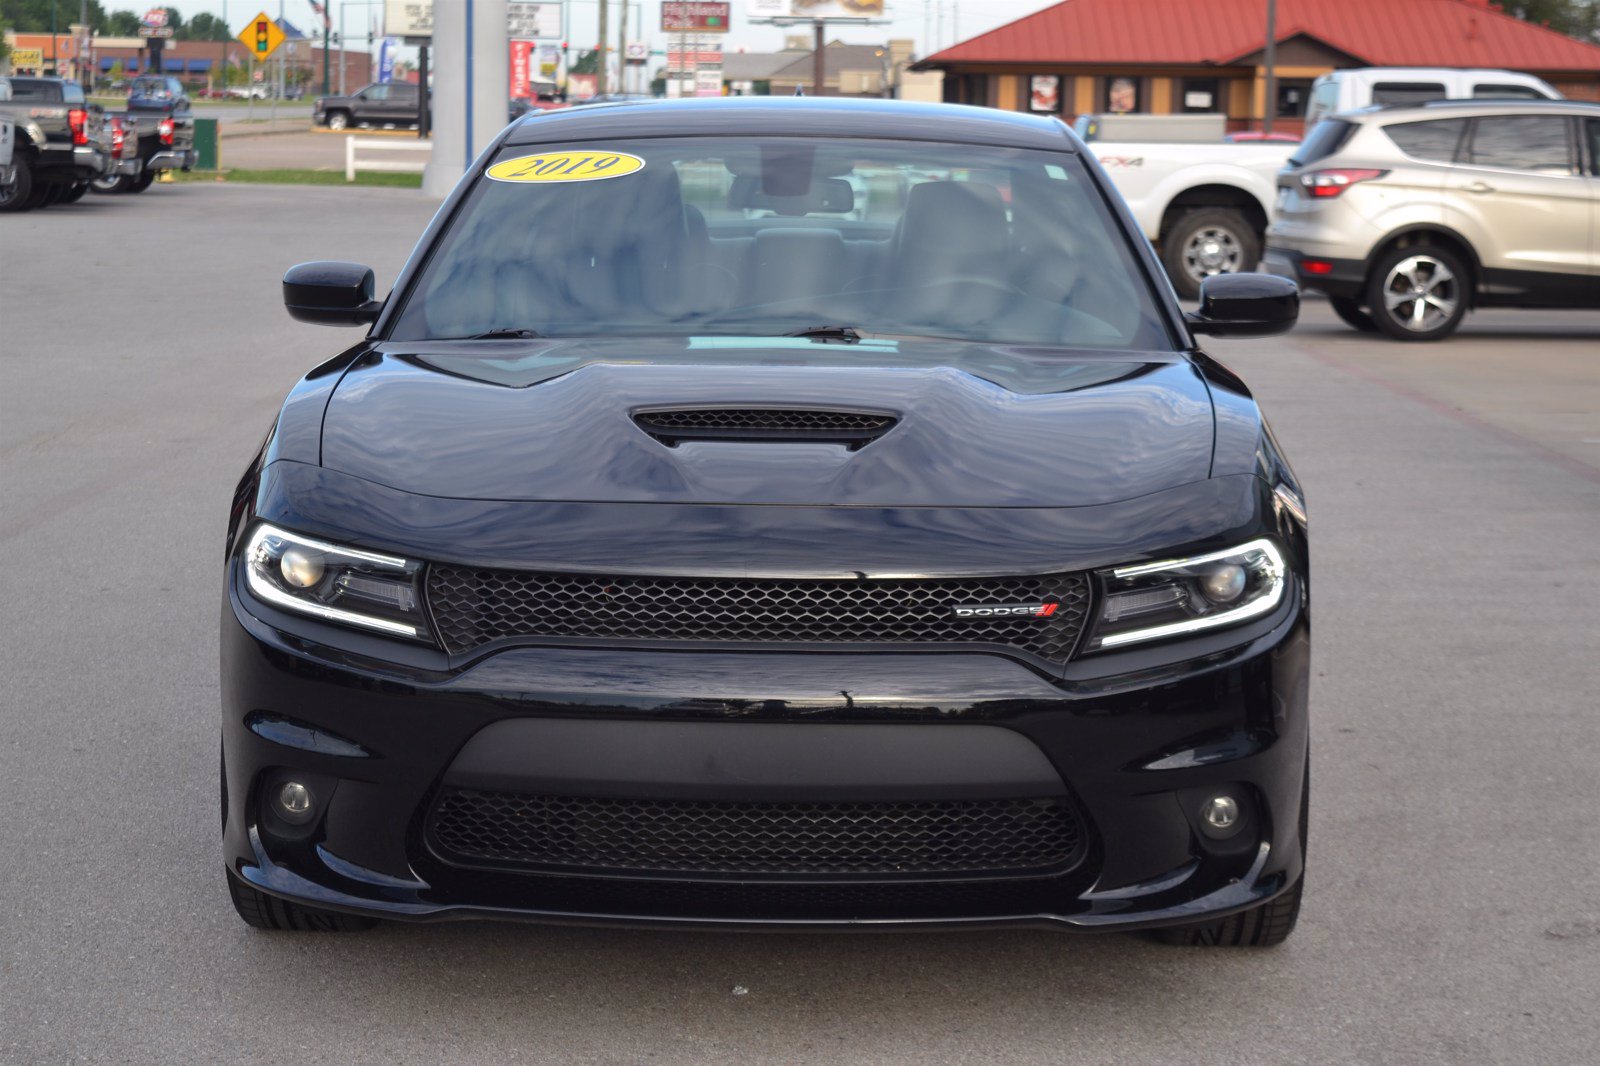 Pre-Owned 2019 Dodge Charger GT 4dr Car in Fayetteville #F1780 ...